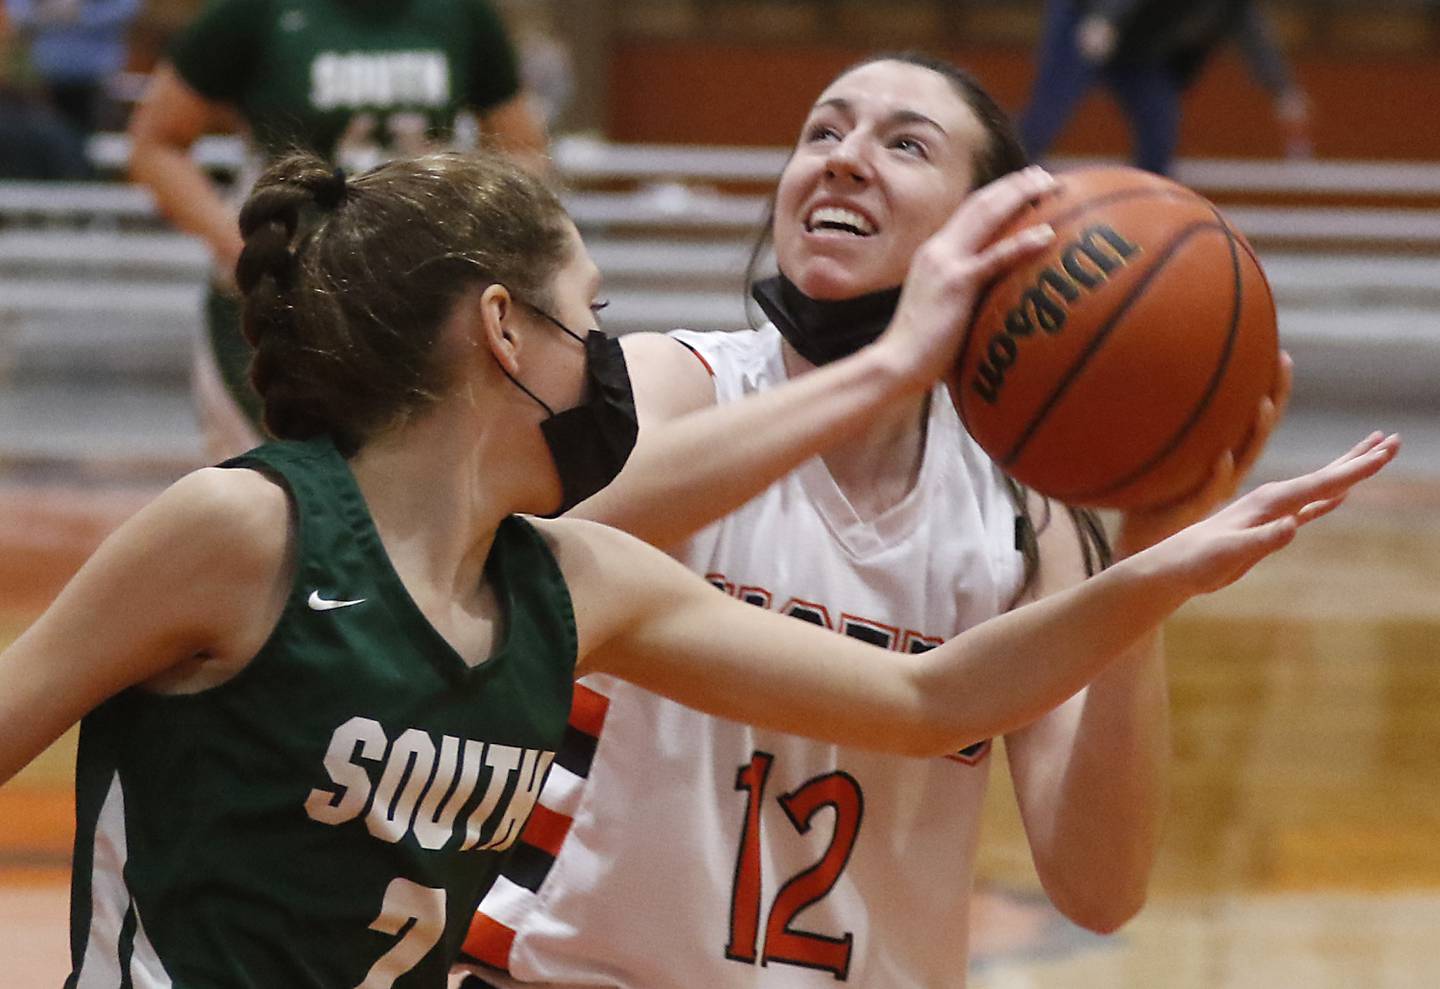 Crystal Lake Central's Paige Keller, right, shoots the ball over Crystal Lake South's Mackenzie Resch during a Fox Valley Conference game Wednesday, Jan. 26, 2022, between Crystal Lake South and Crystal Lake Central at Crystal Lake Central High School.